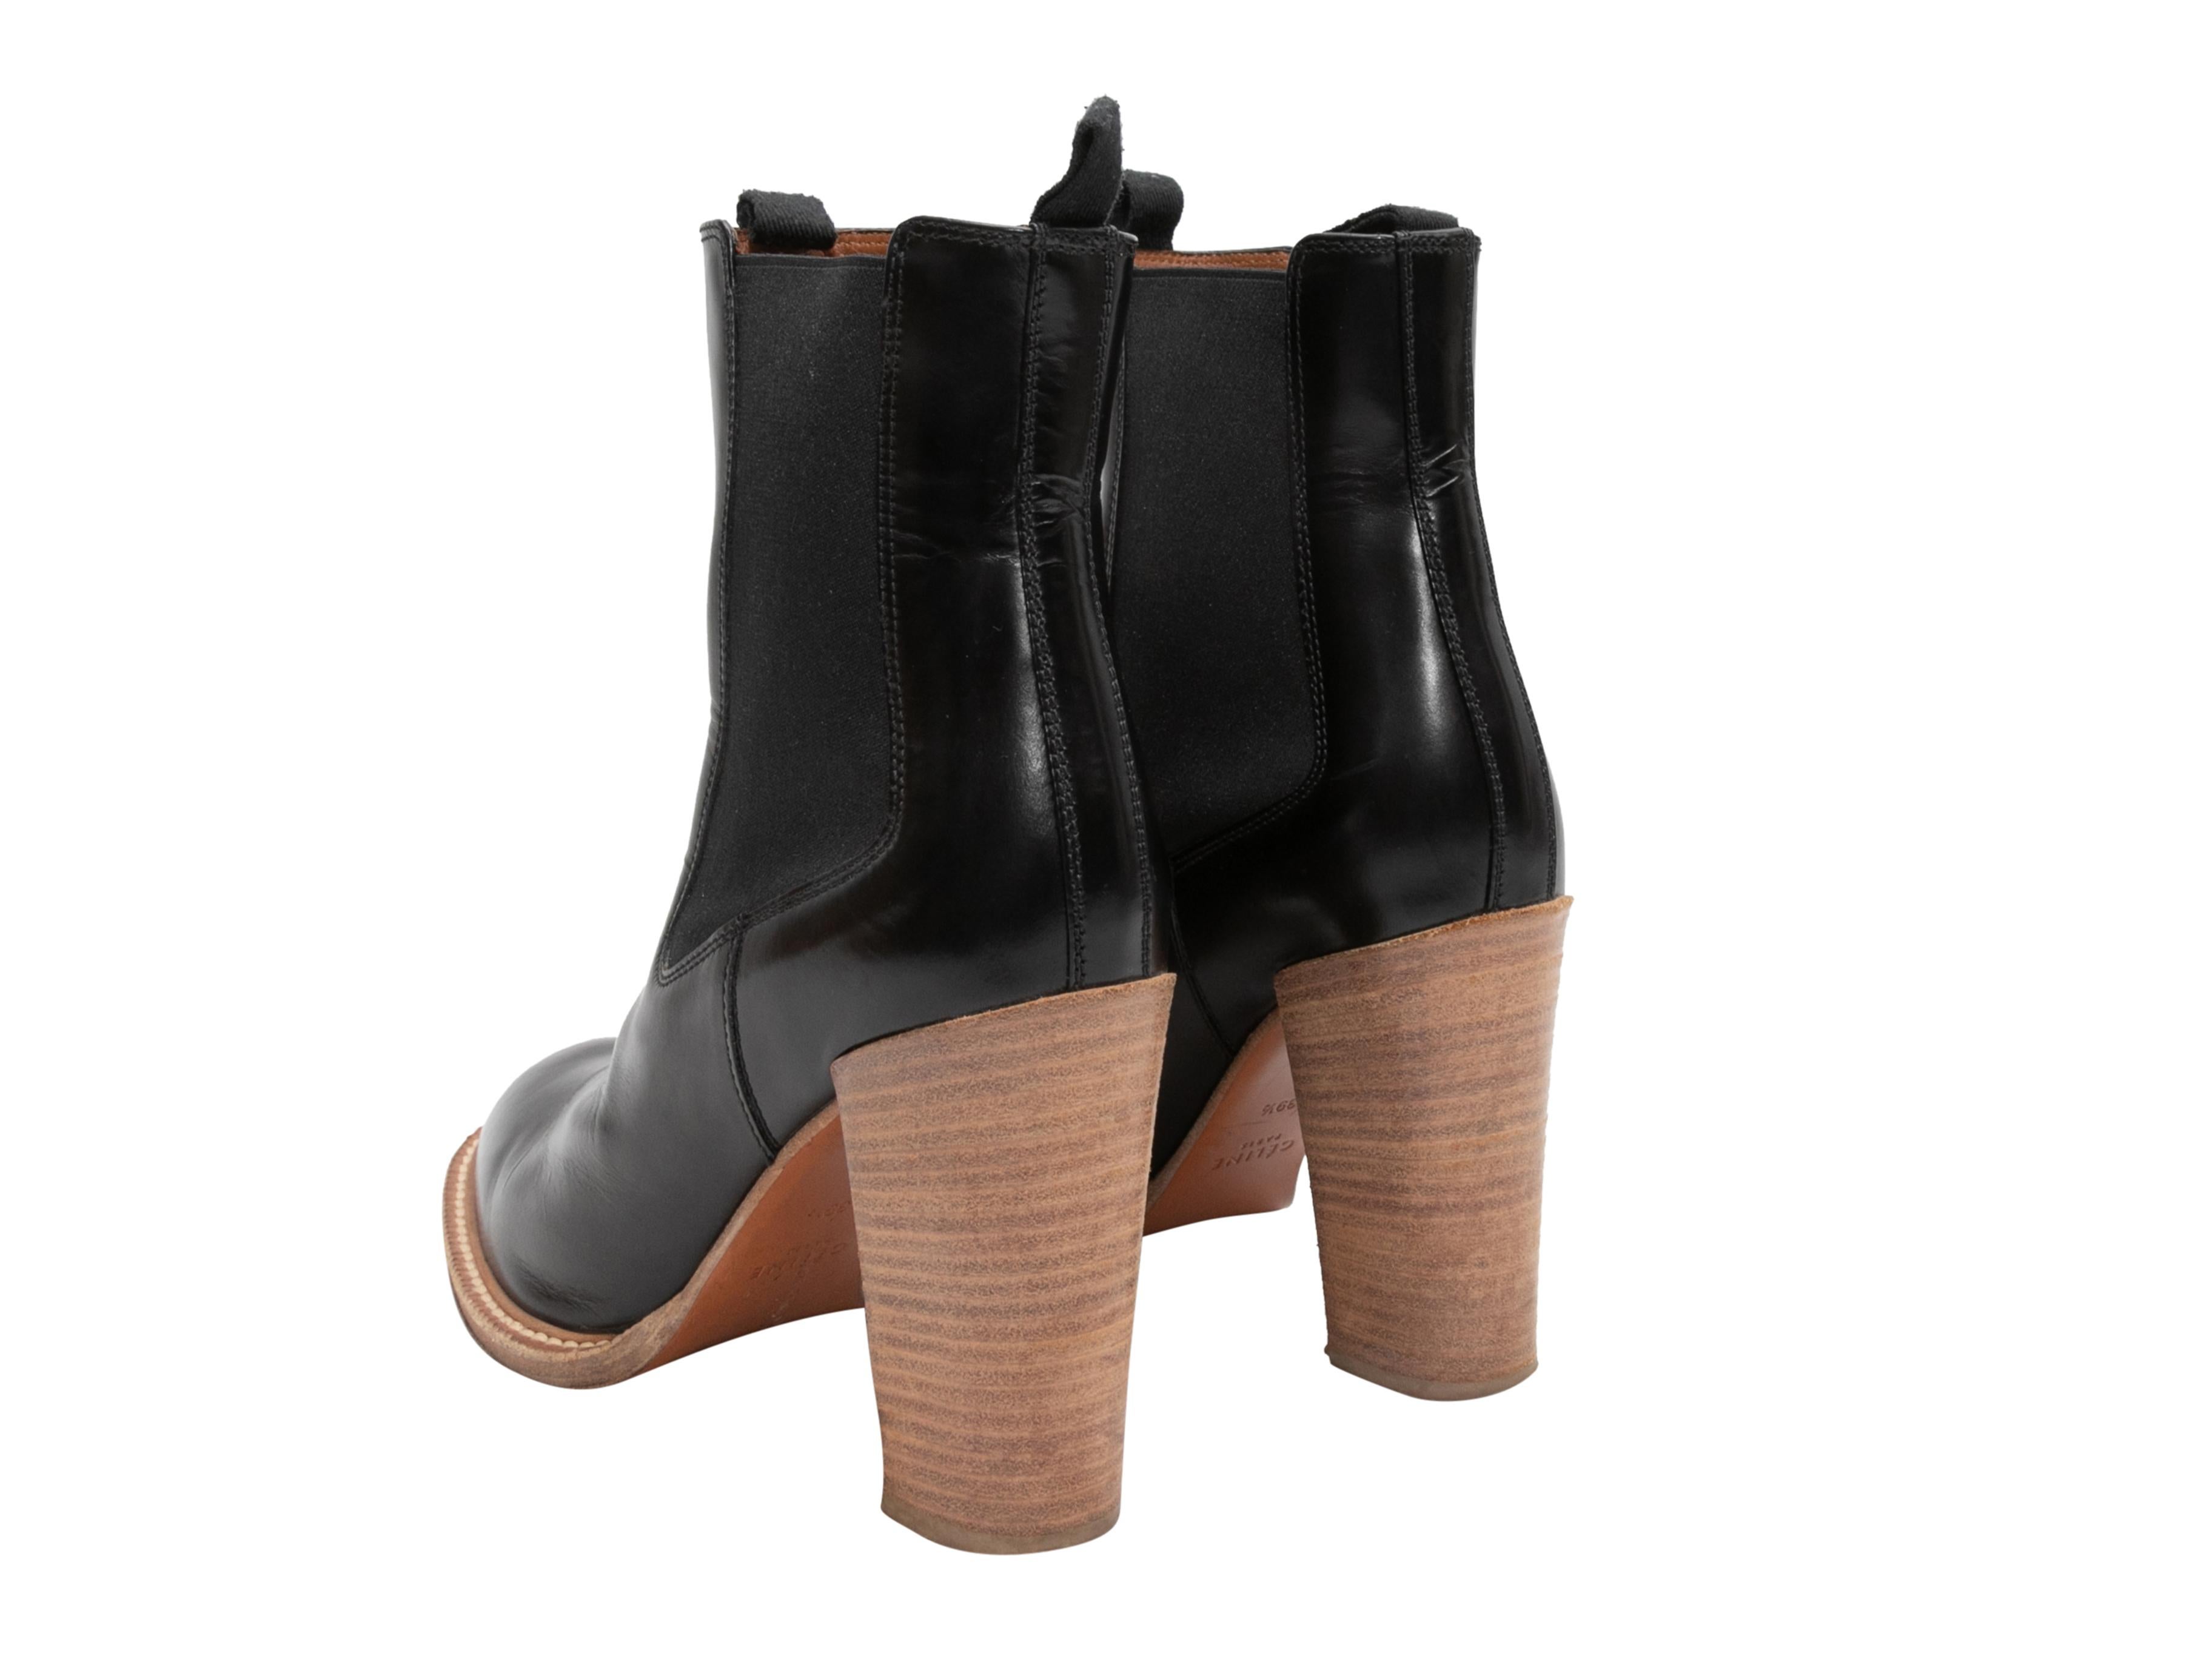 Black Celine Leather Ankle Boots Size 39.5 In Good Condition For Sale In New York, NY